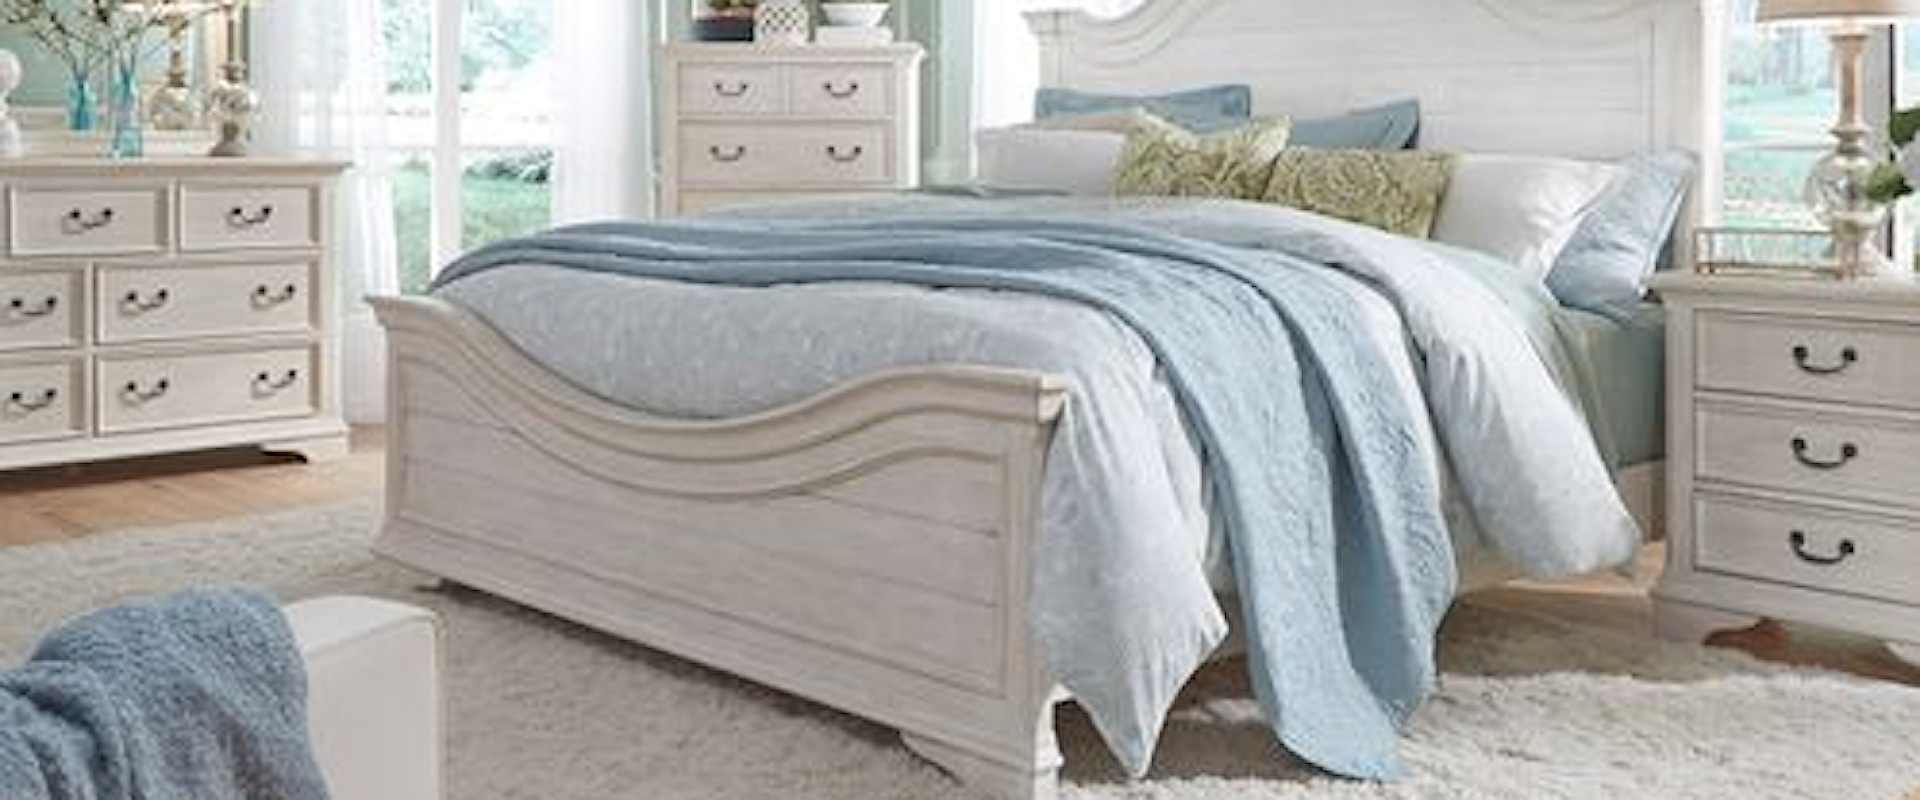 Transitional 4-Piece California King Bedroom Set with Bracket Feet